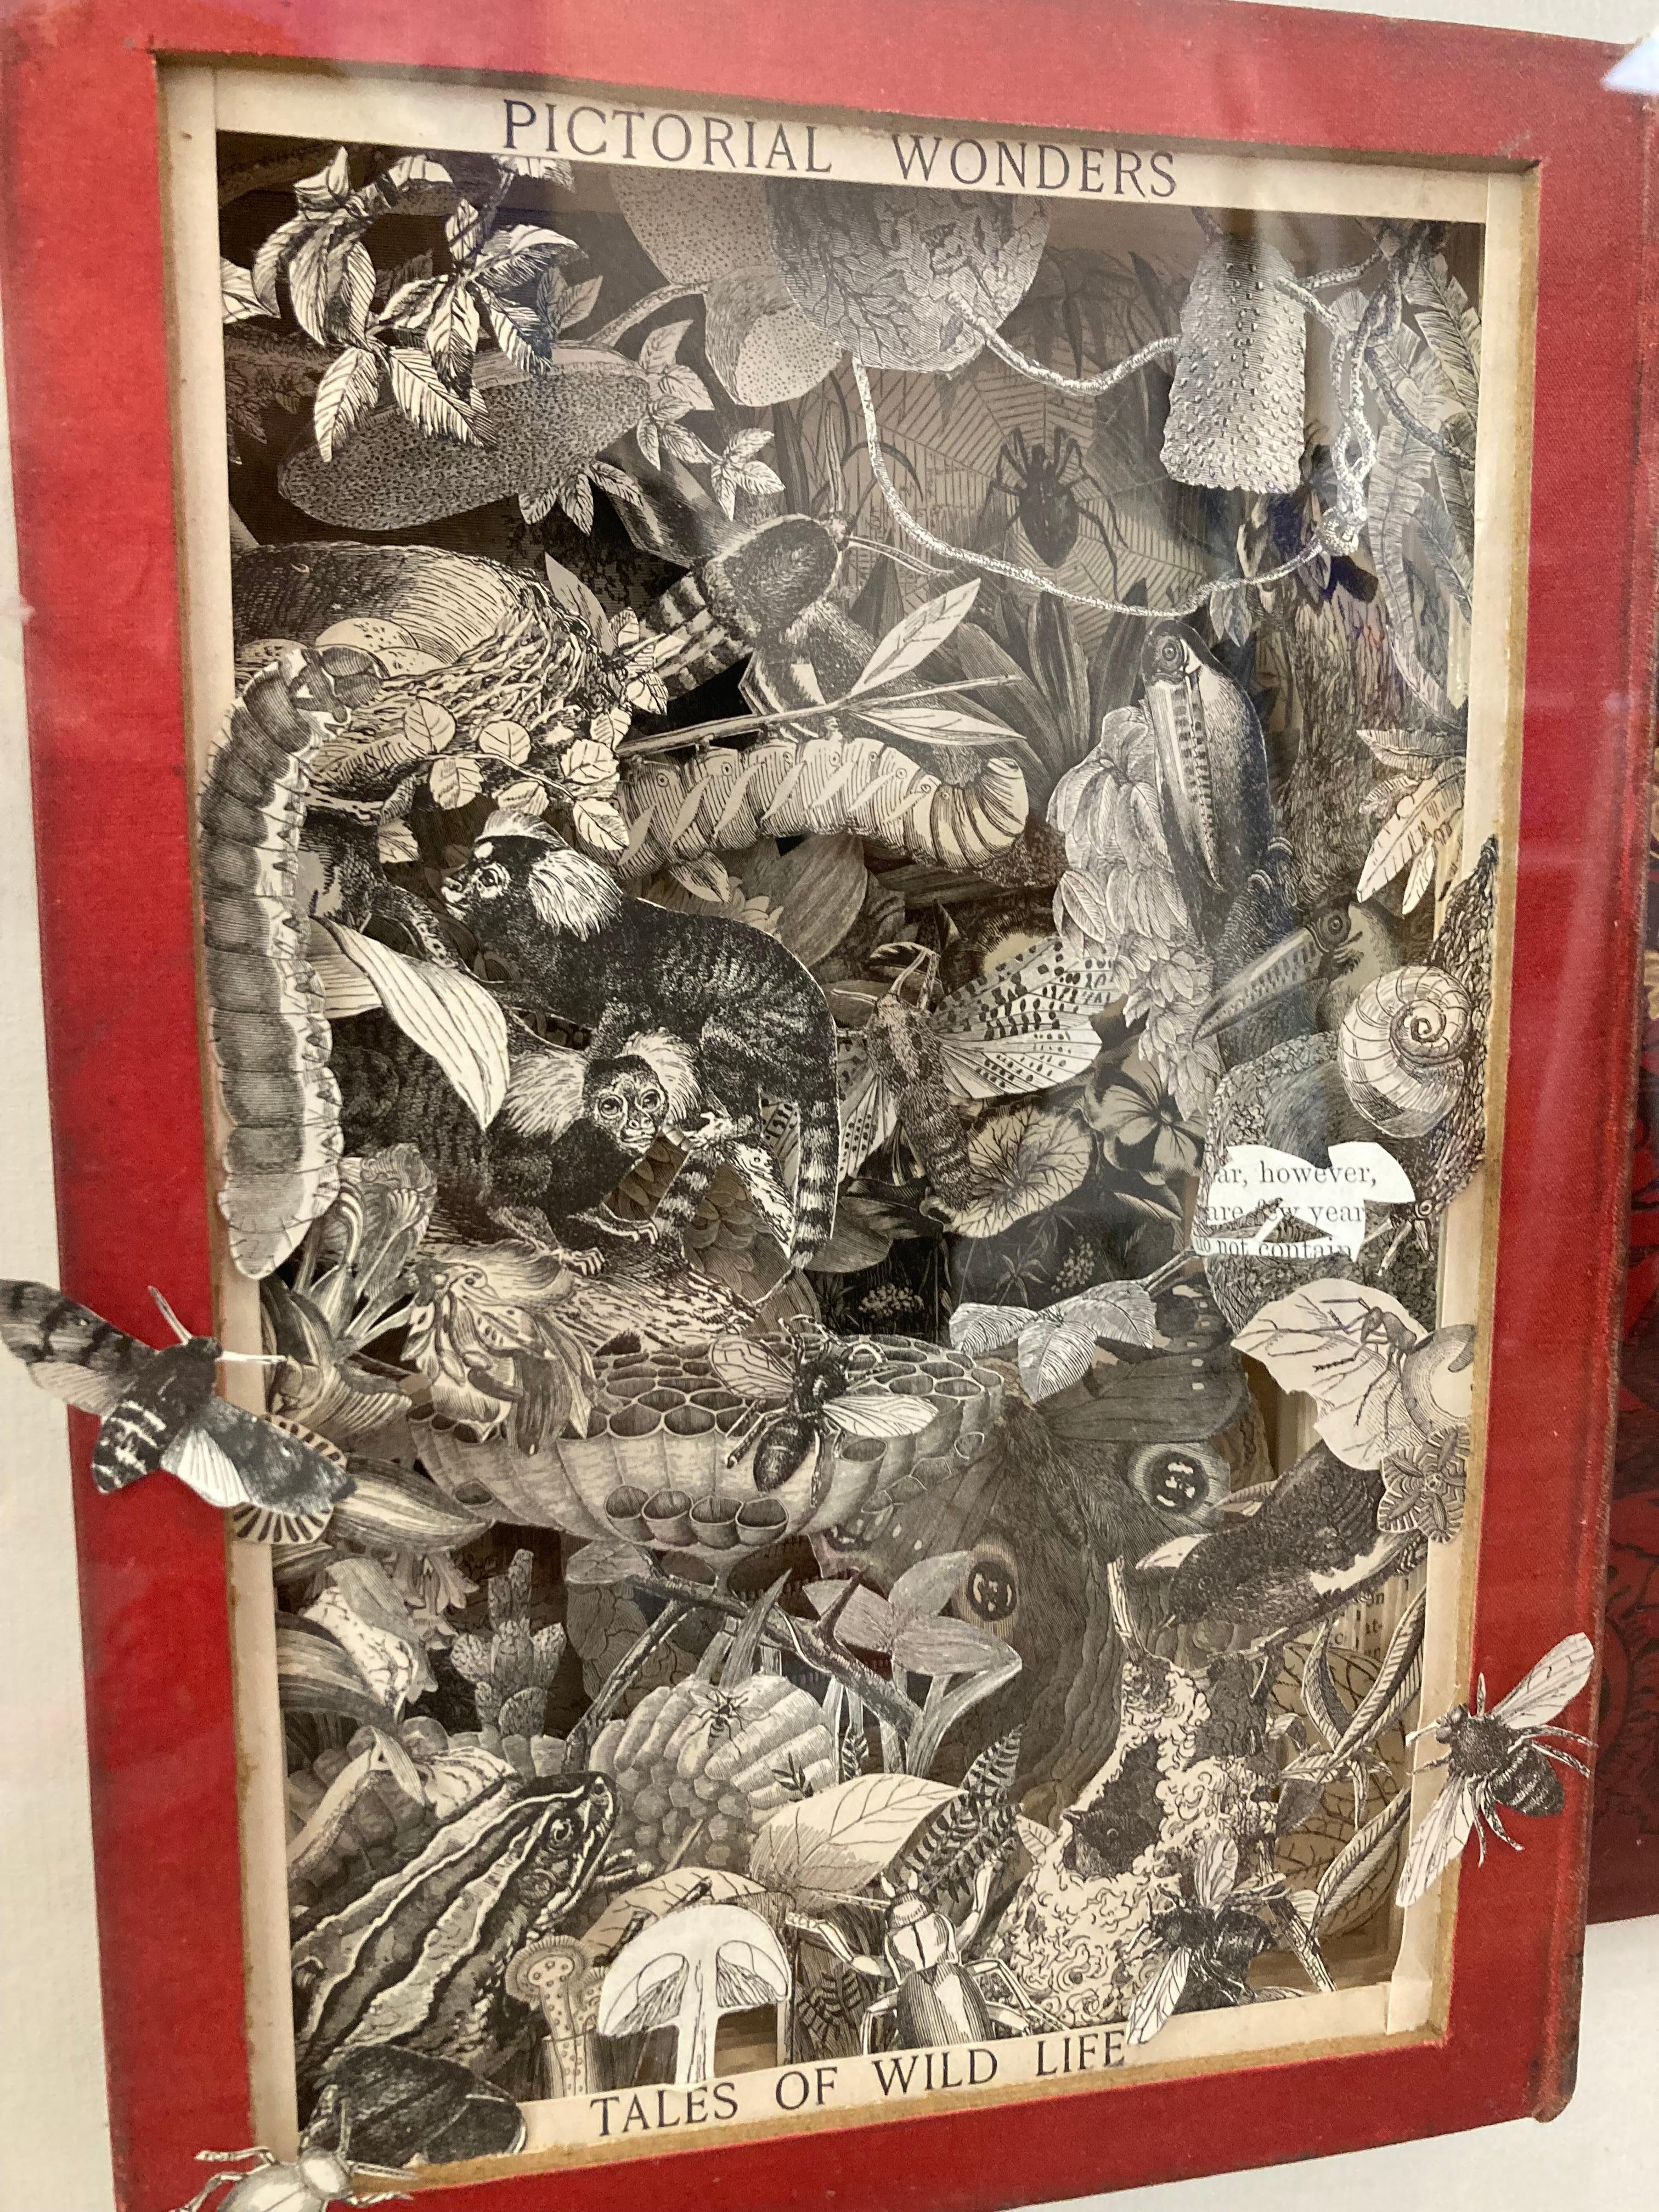 Pictorial Wonders and Tales of Wild Life - sculpted red book framed glazed  - Contemporary Mixed Media Art by Adele Moreau